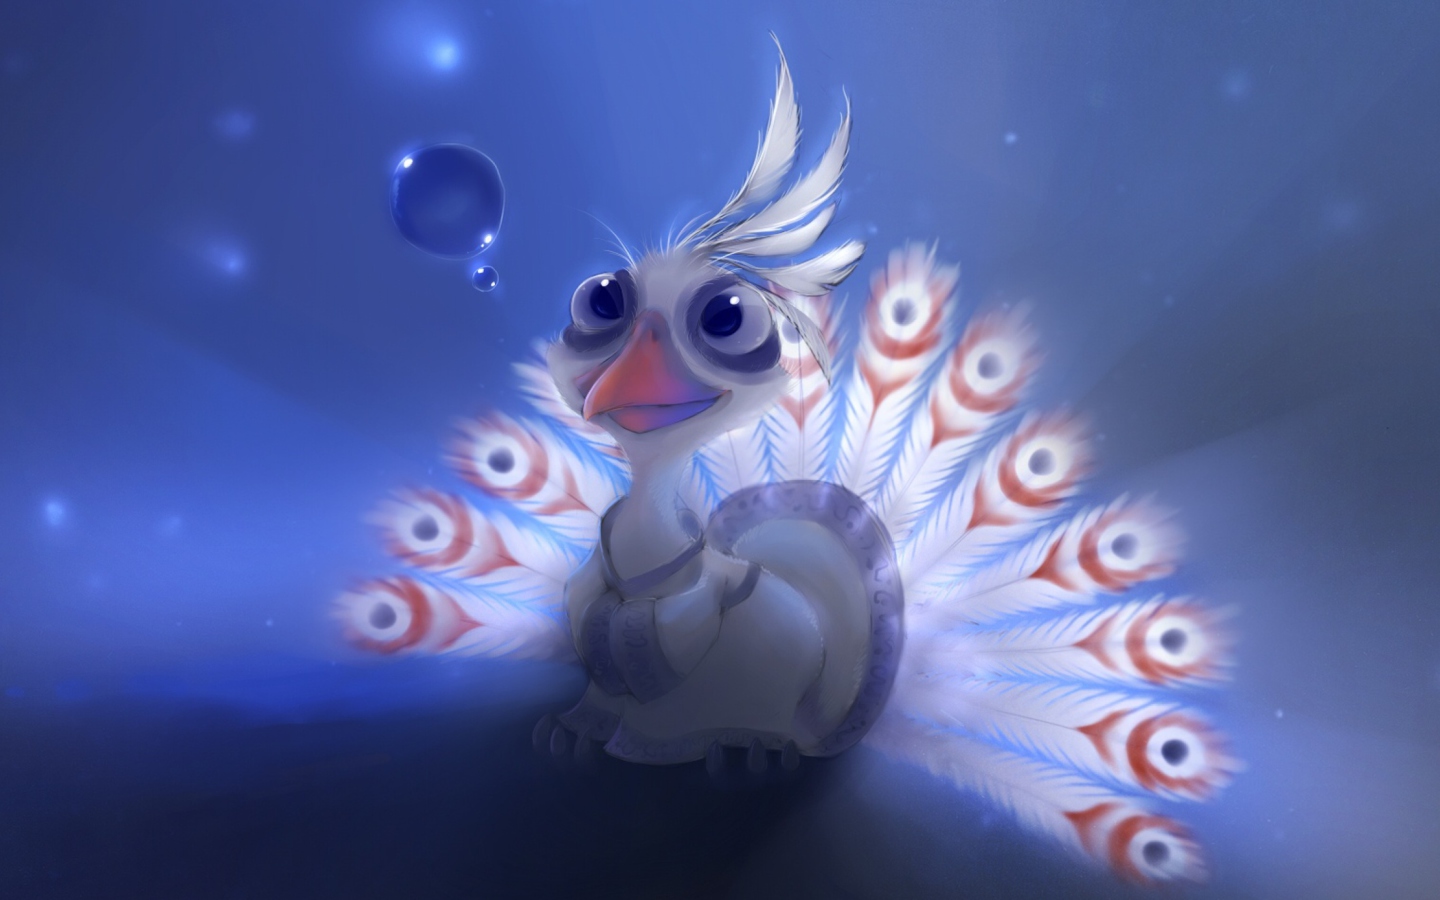 White Peacock Painting wallpaper 1440x900